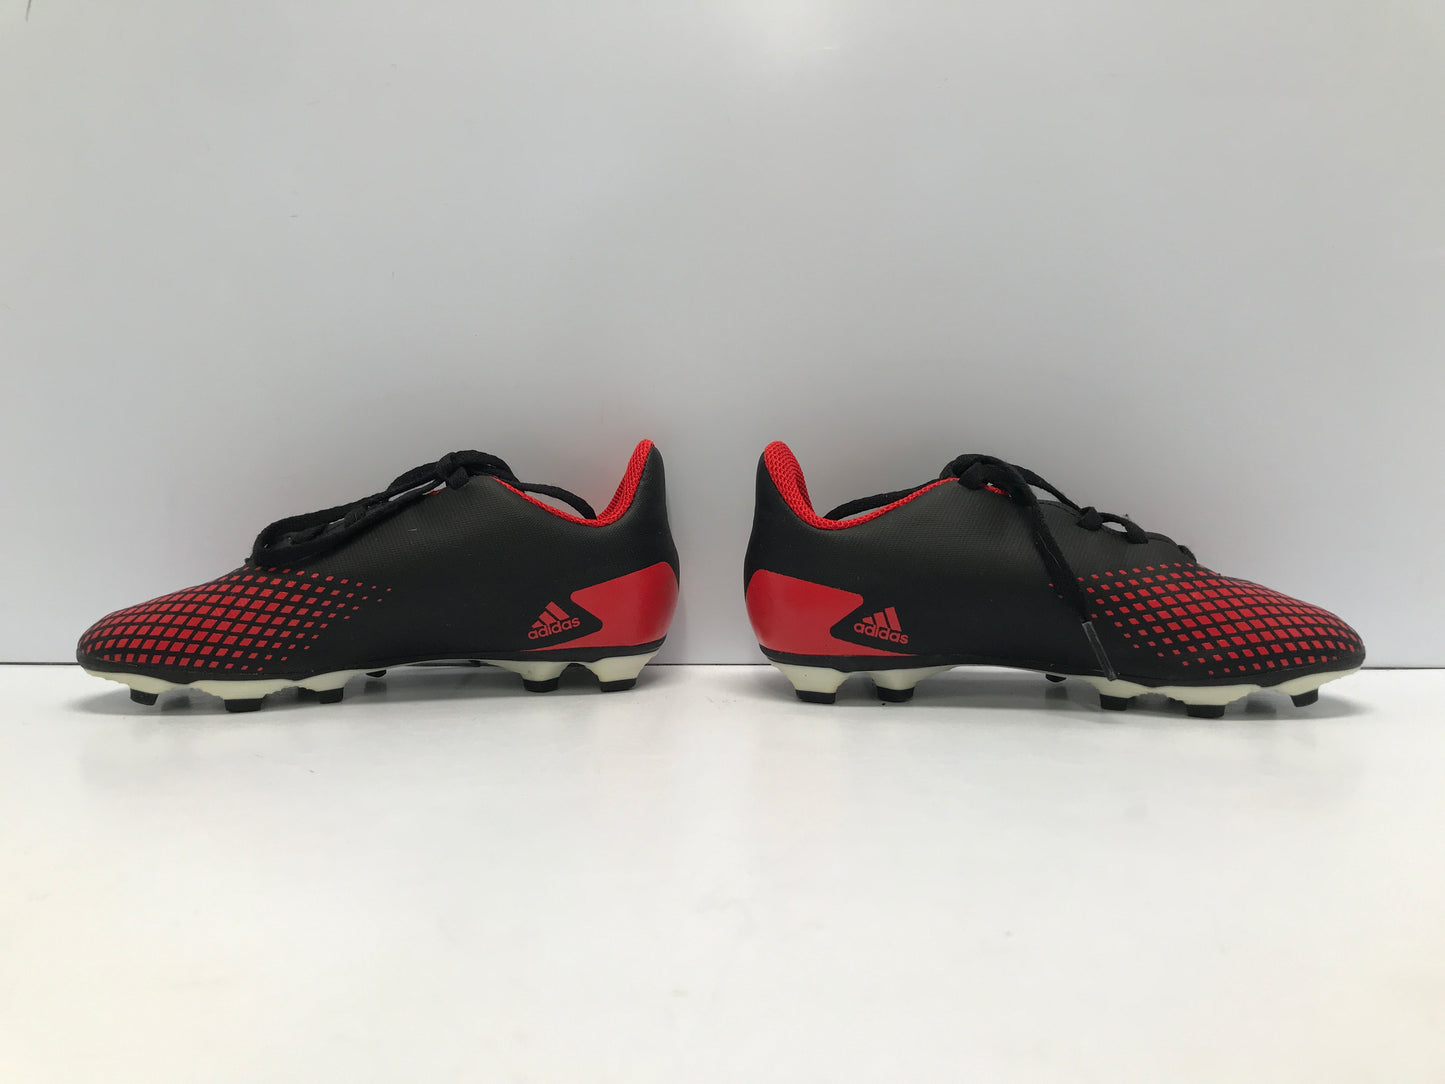 Soccer Shoes Cleats Child Size 12 Adidas Preditor Black Red LIke New